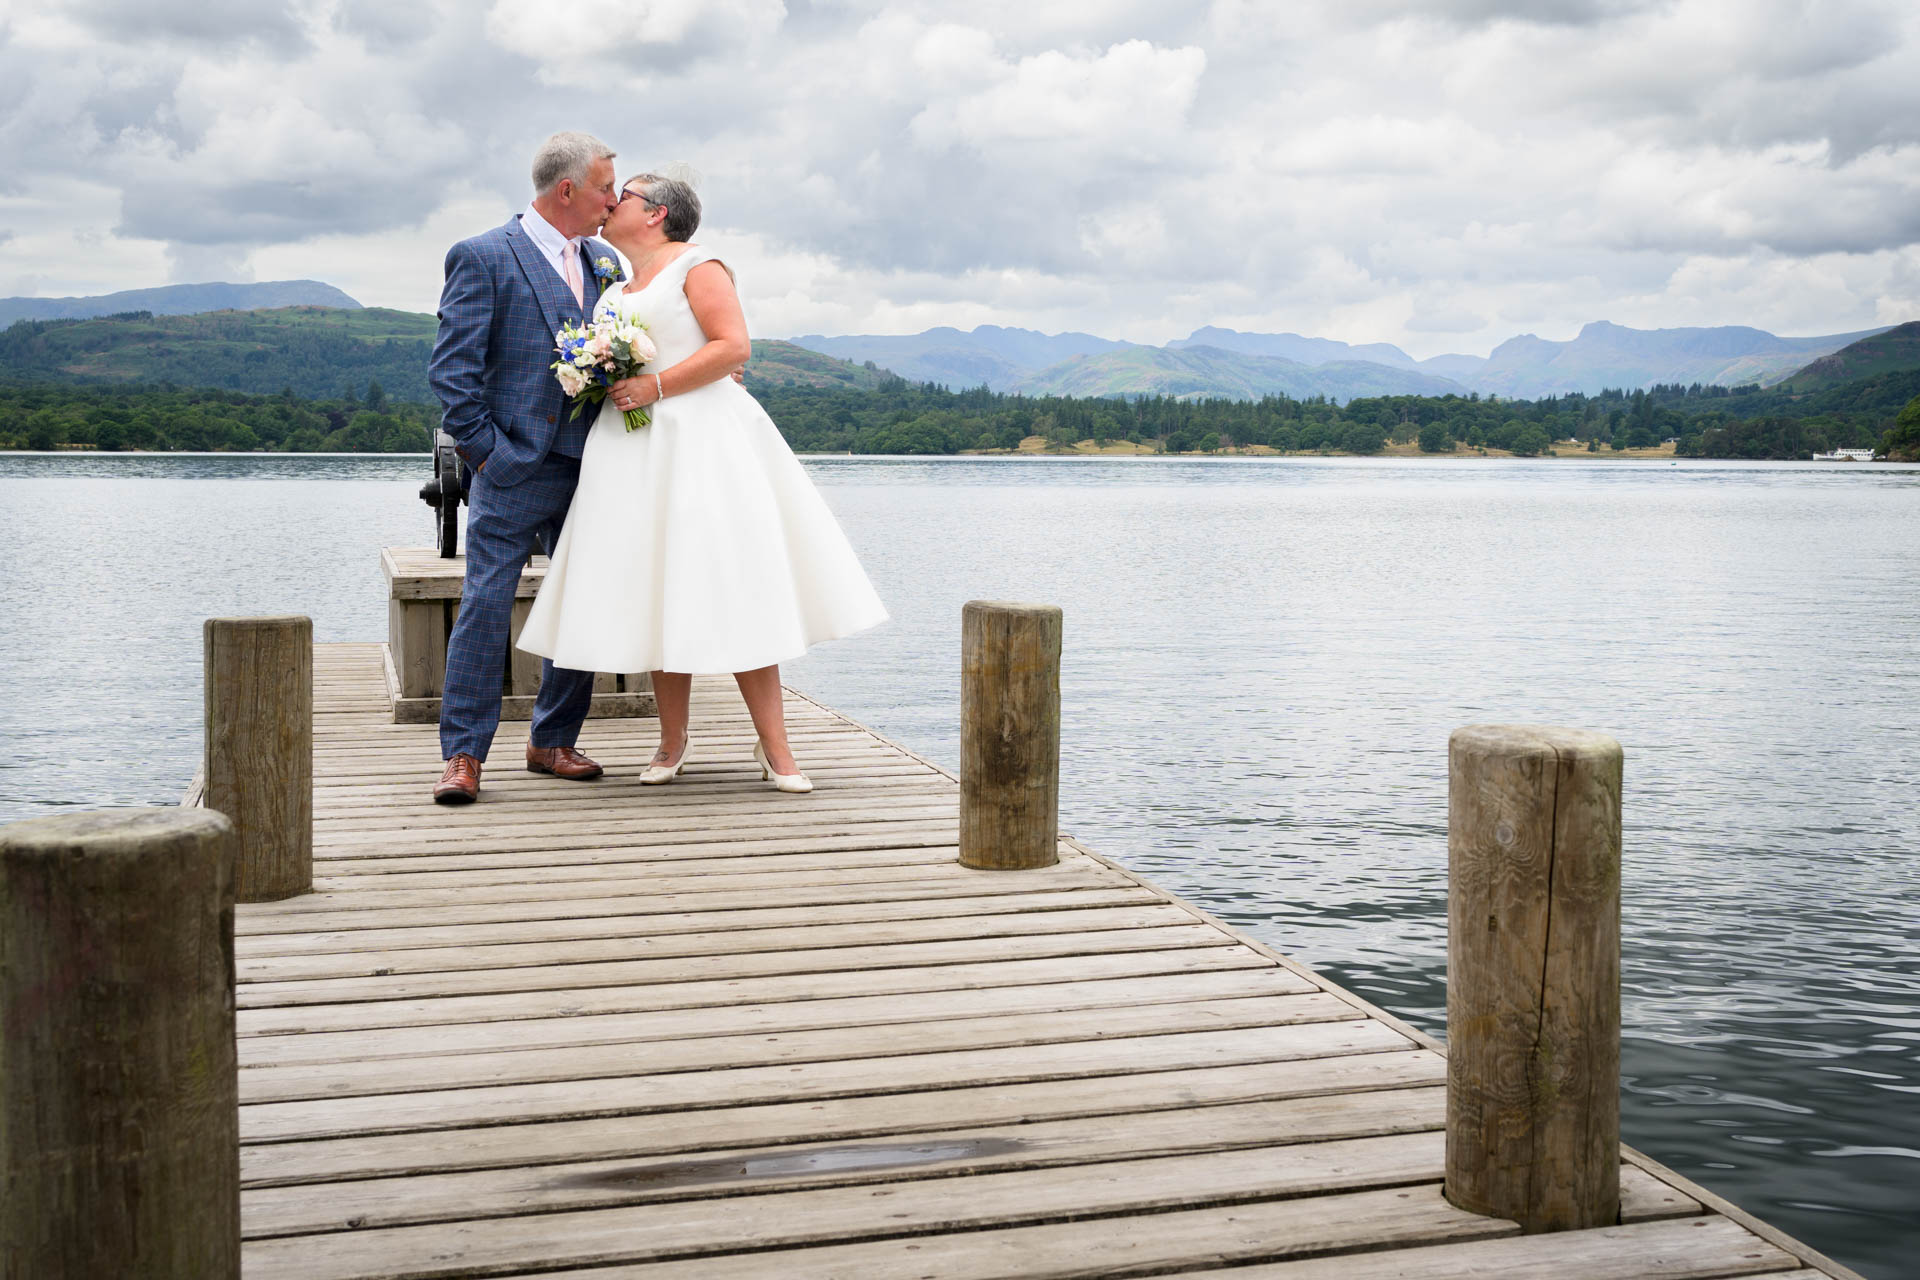 Wedding portrait of bride and groom kissing on jetty at Windermere with lake and mountains in background.